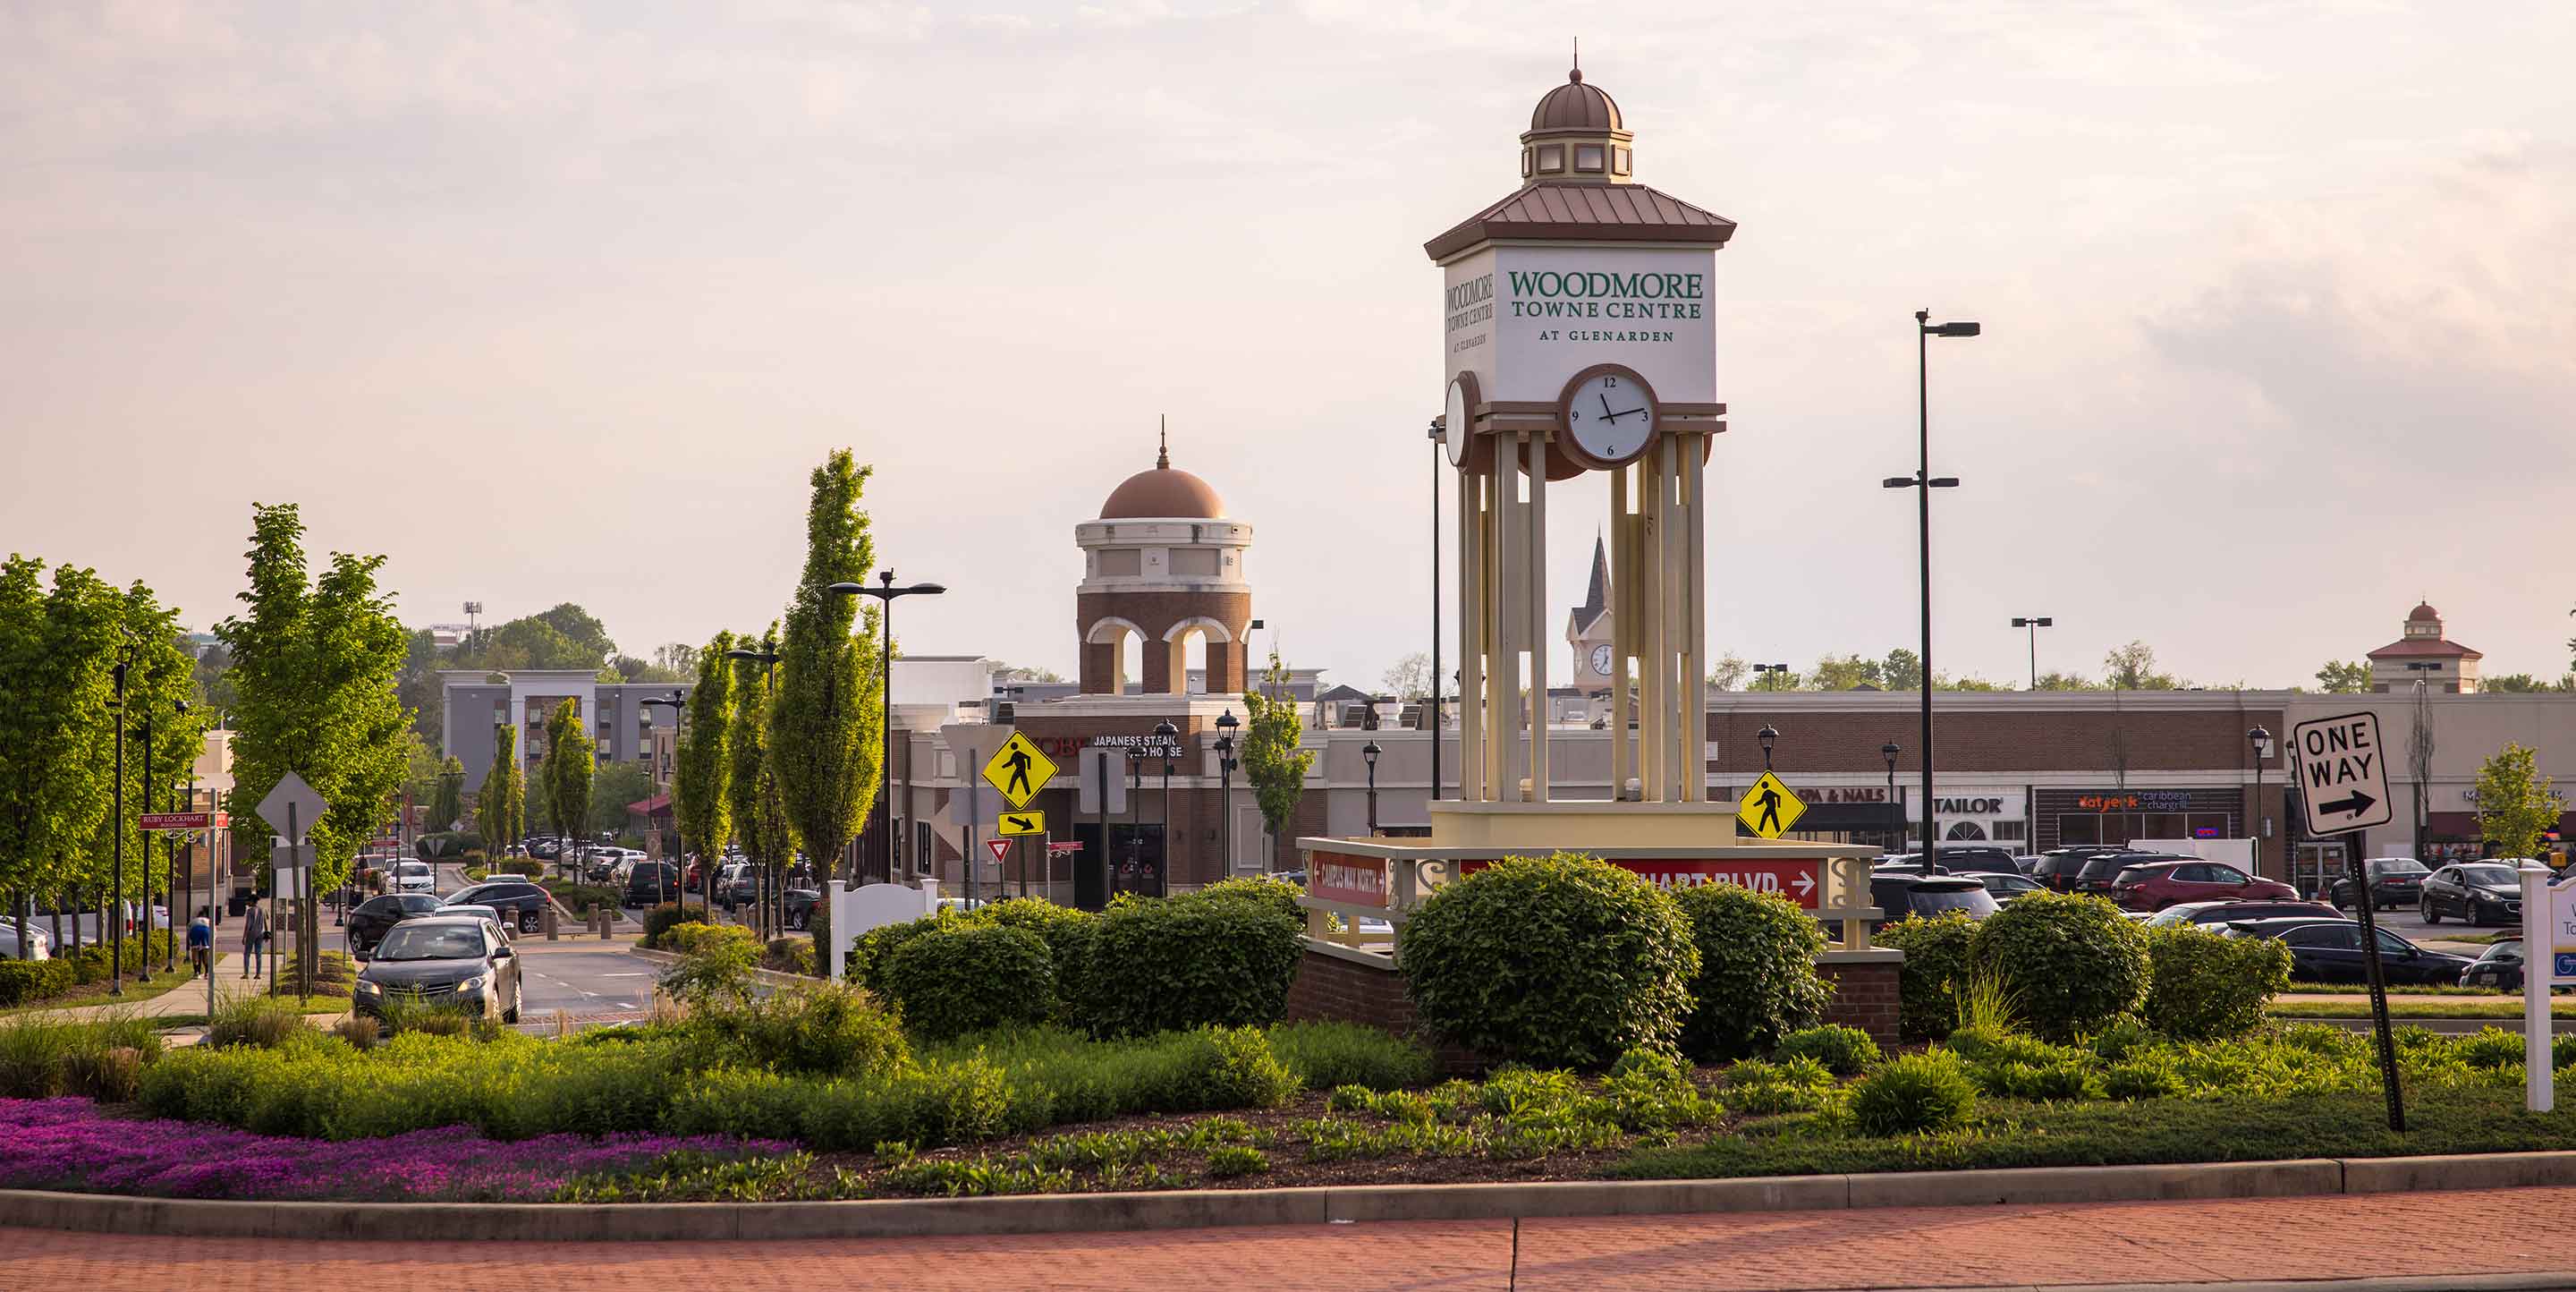 Main image of Woodmore Towne Centre shopping center with various stores.